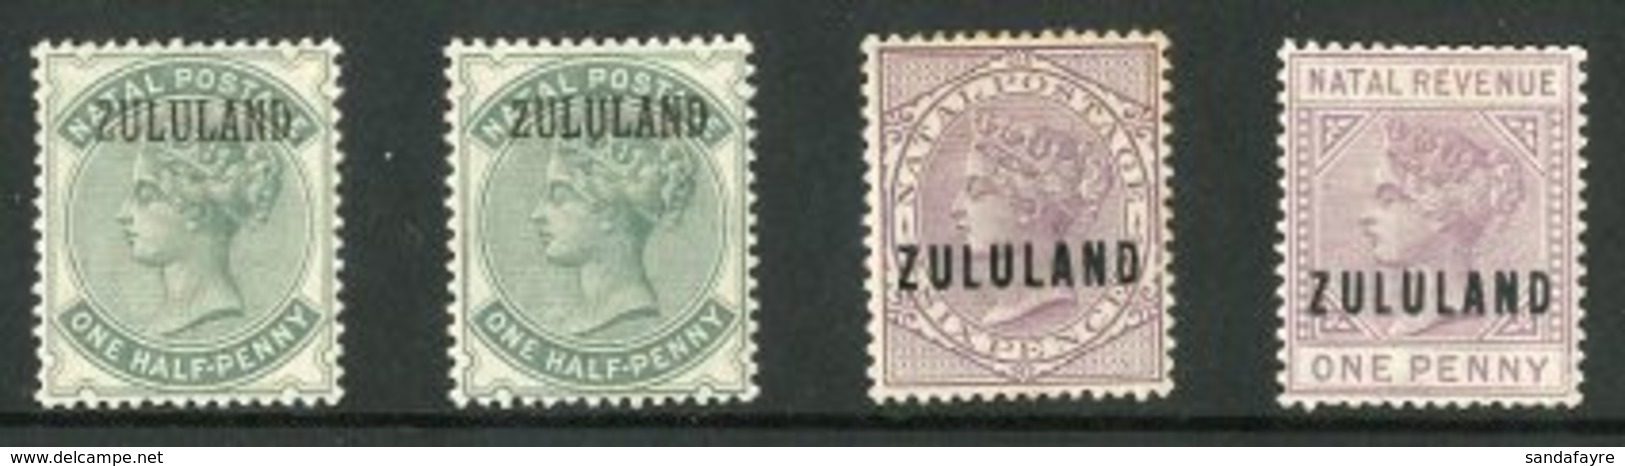 ZULULAND Overprints On Natal 1888 ½d Dull Green With And Without Stop, 1893 6d Dull Purple, And Postal Fiscal 1891 1d, F - Non Classés